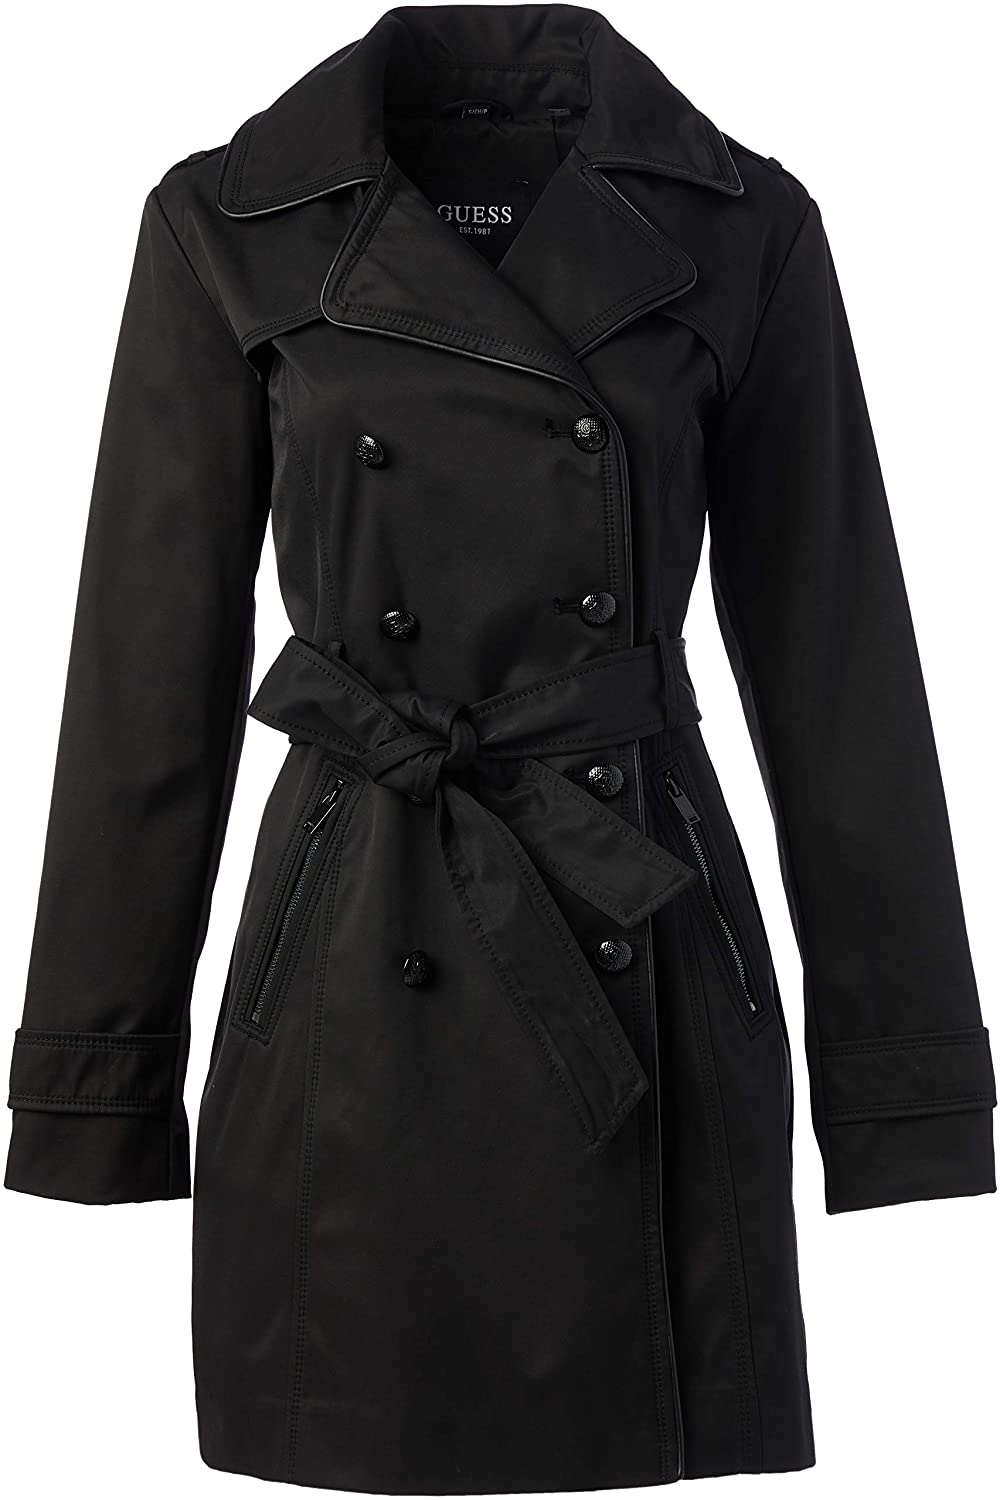 GUESS womens Double Breasted Trenchcoat